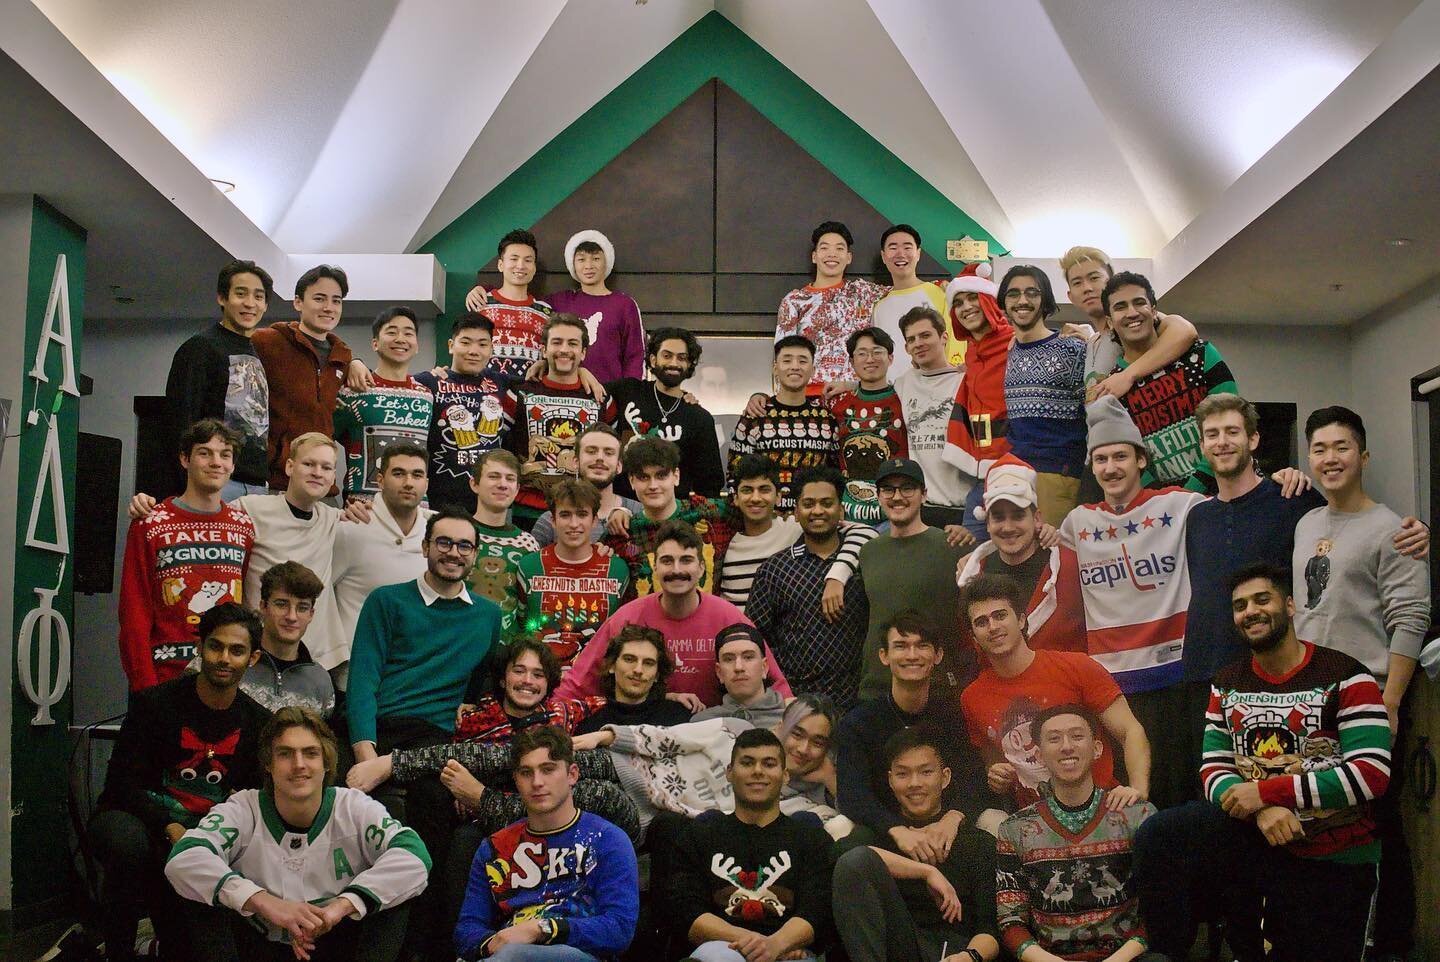 Merry Christmas from the BC Chapter!